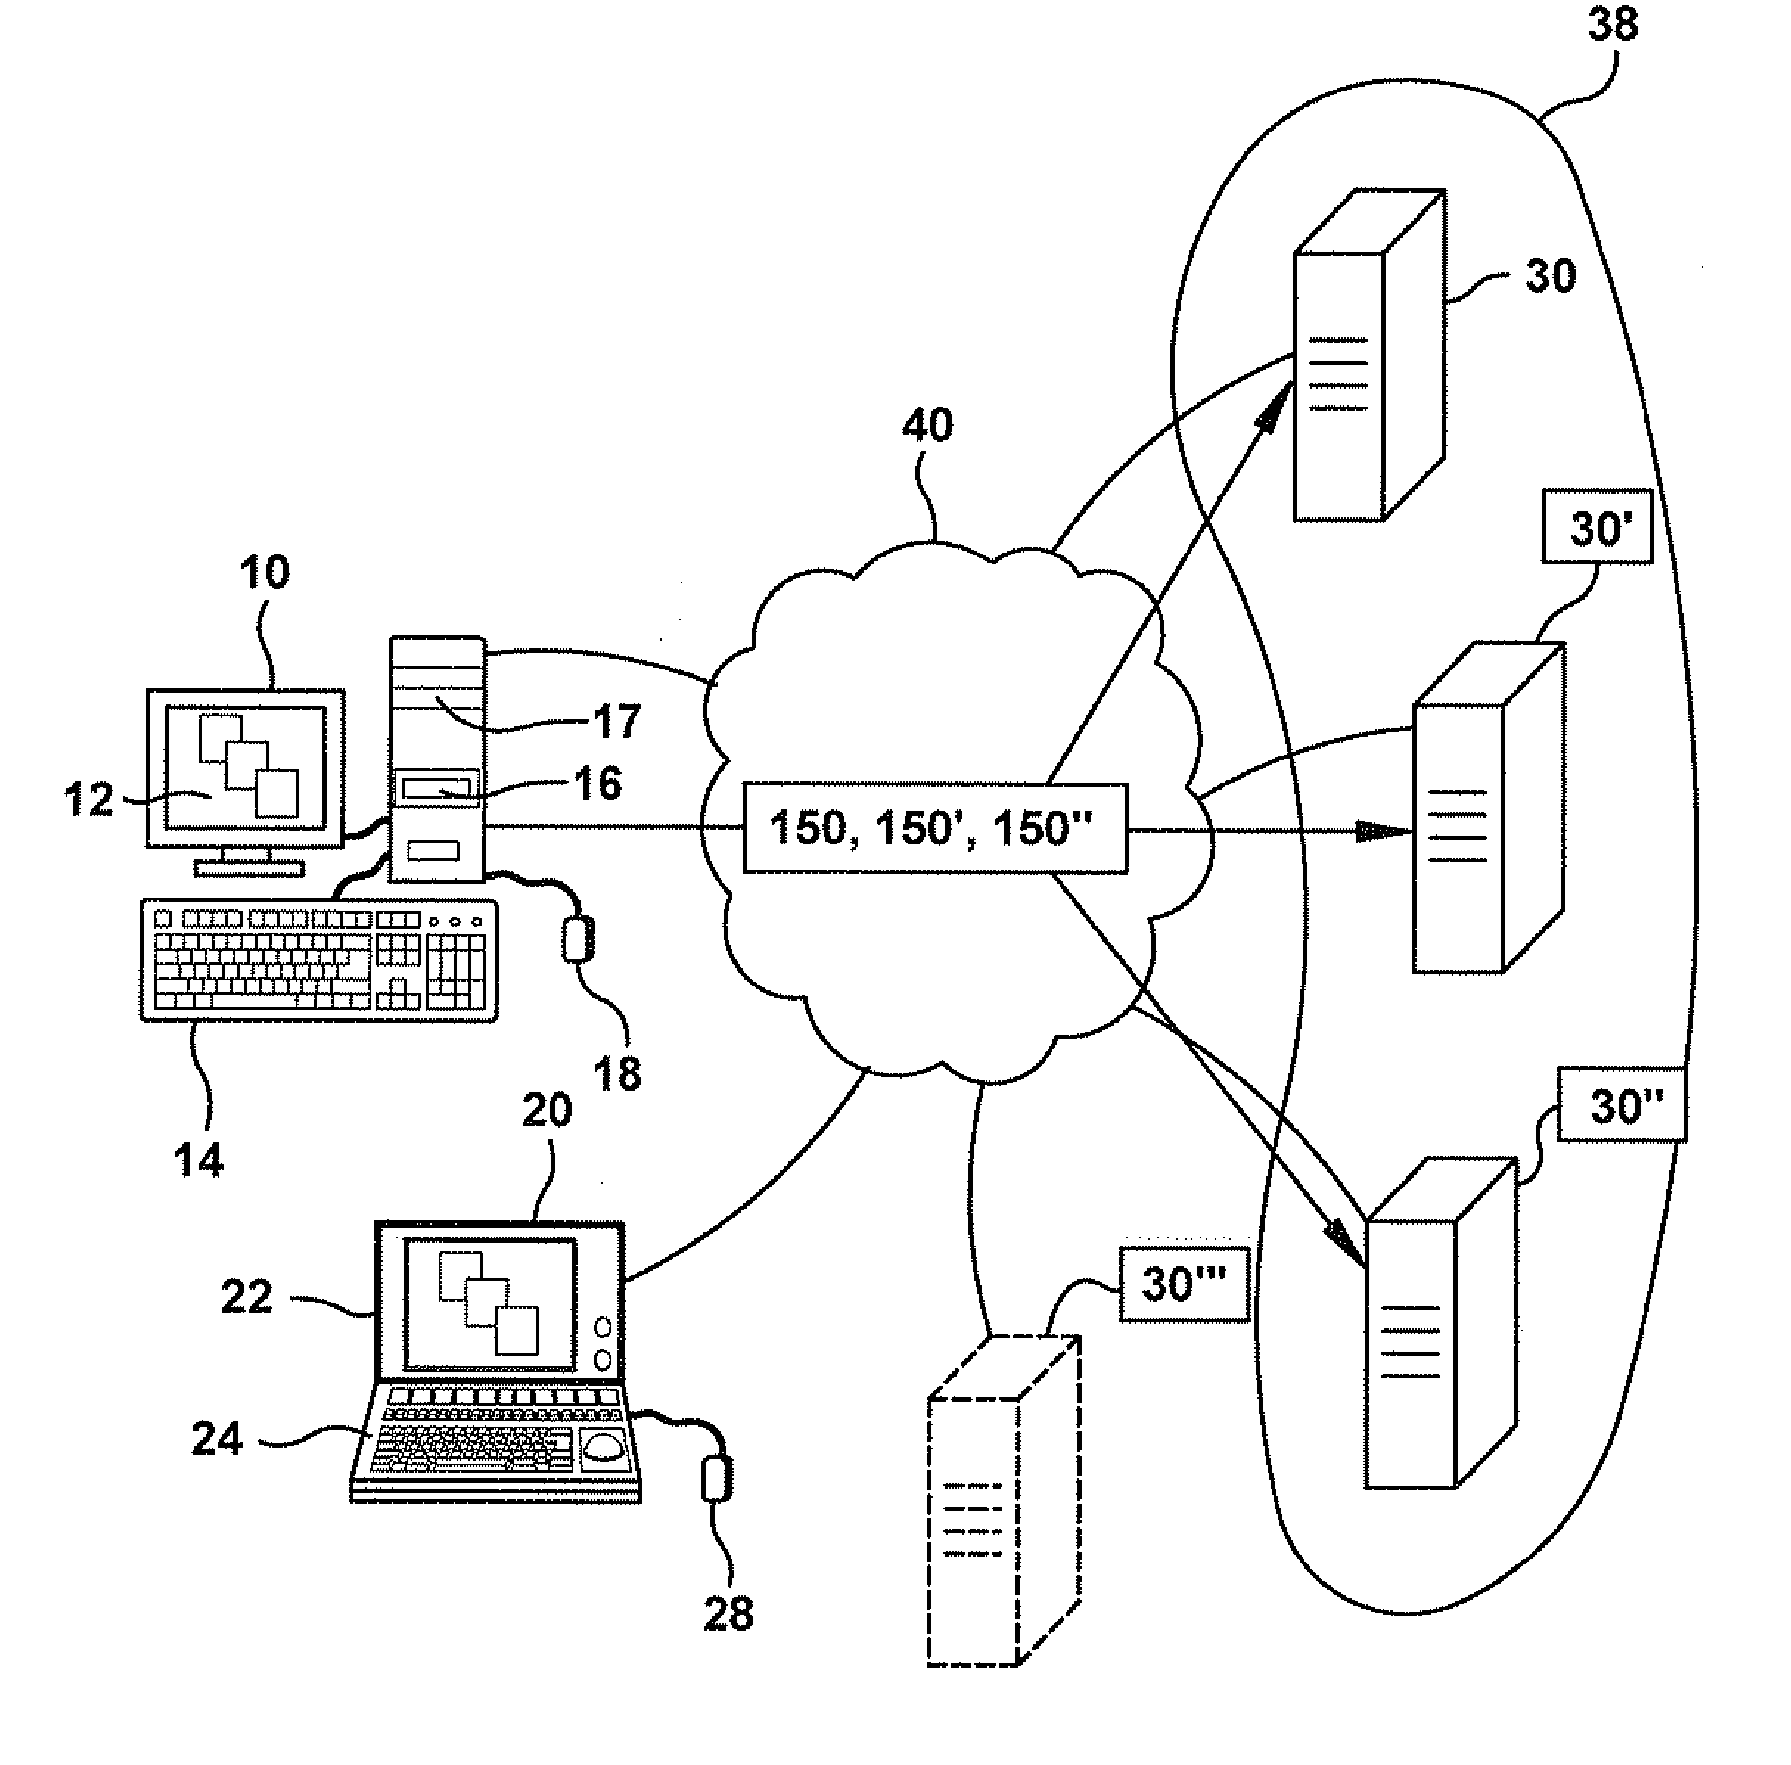 Methods and systems for providing authorized remote access to a computing environment provided by a virtual machine